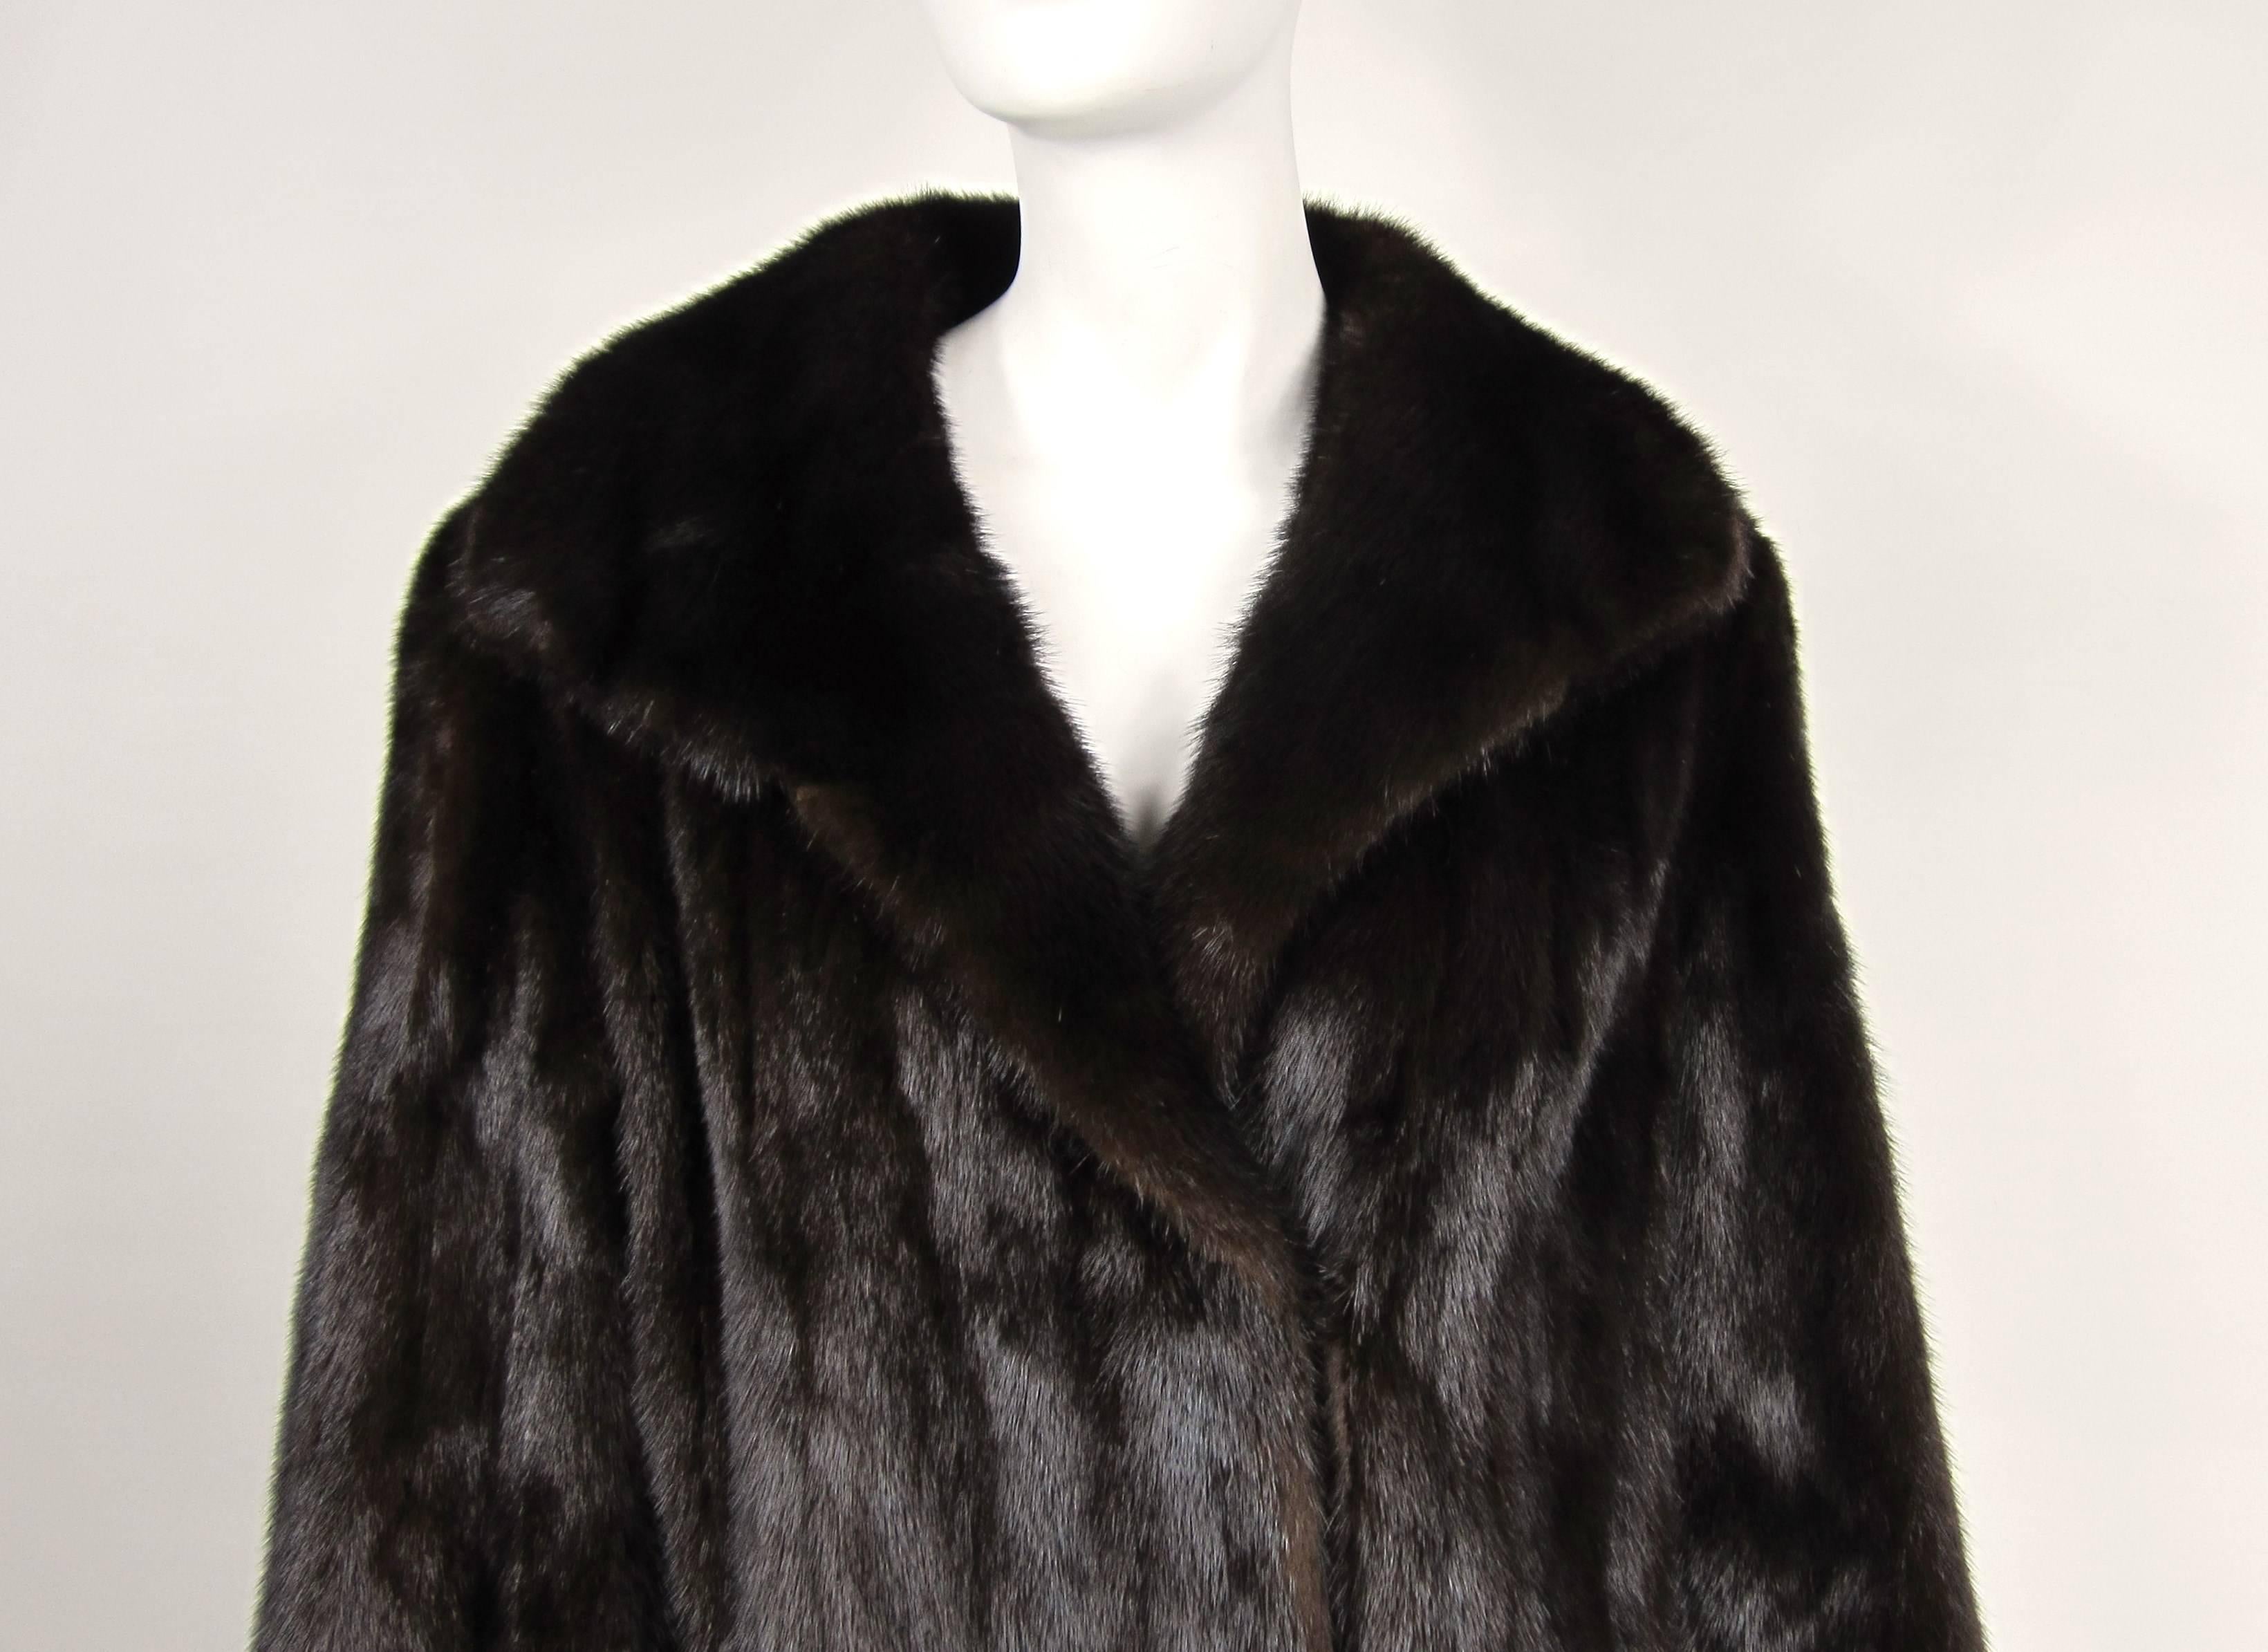 Stunning Classic Mink Coat. Straight cut, timeless. Soft and supple. Very Deep color on this one. Velvet lined pockets with a 2 clip closure. This is not monogrammed. Measurements up to 40-inch chest, up to 42-inch waist, up to 48-inch hips, 23-inch